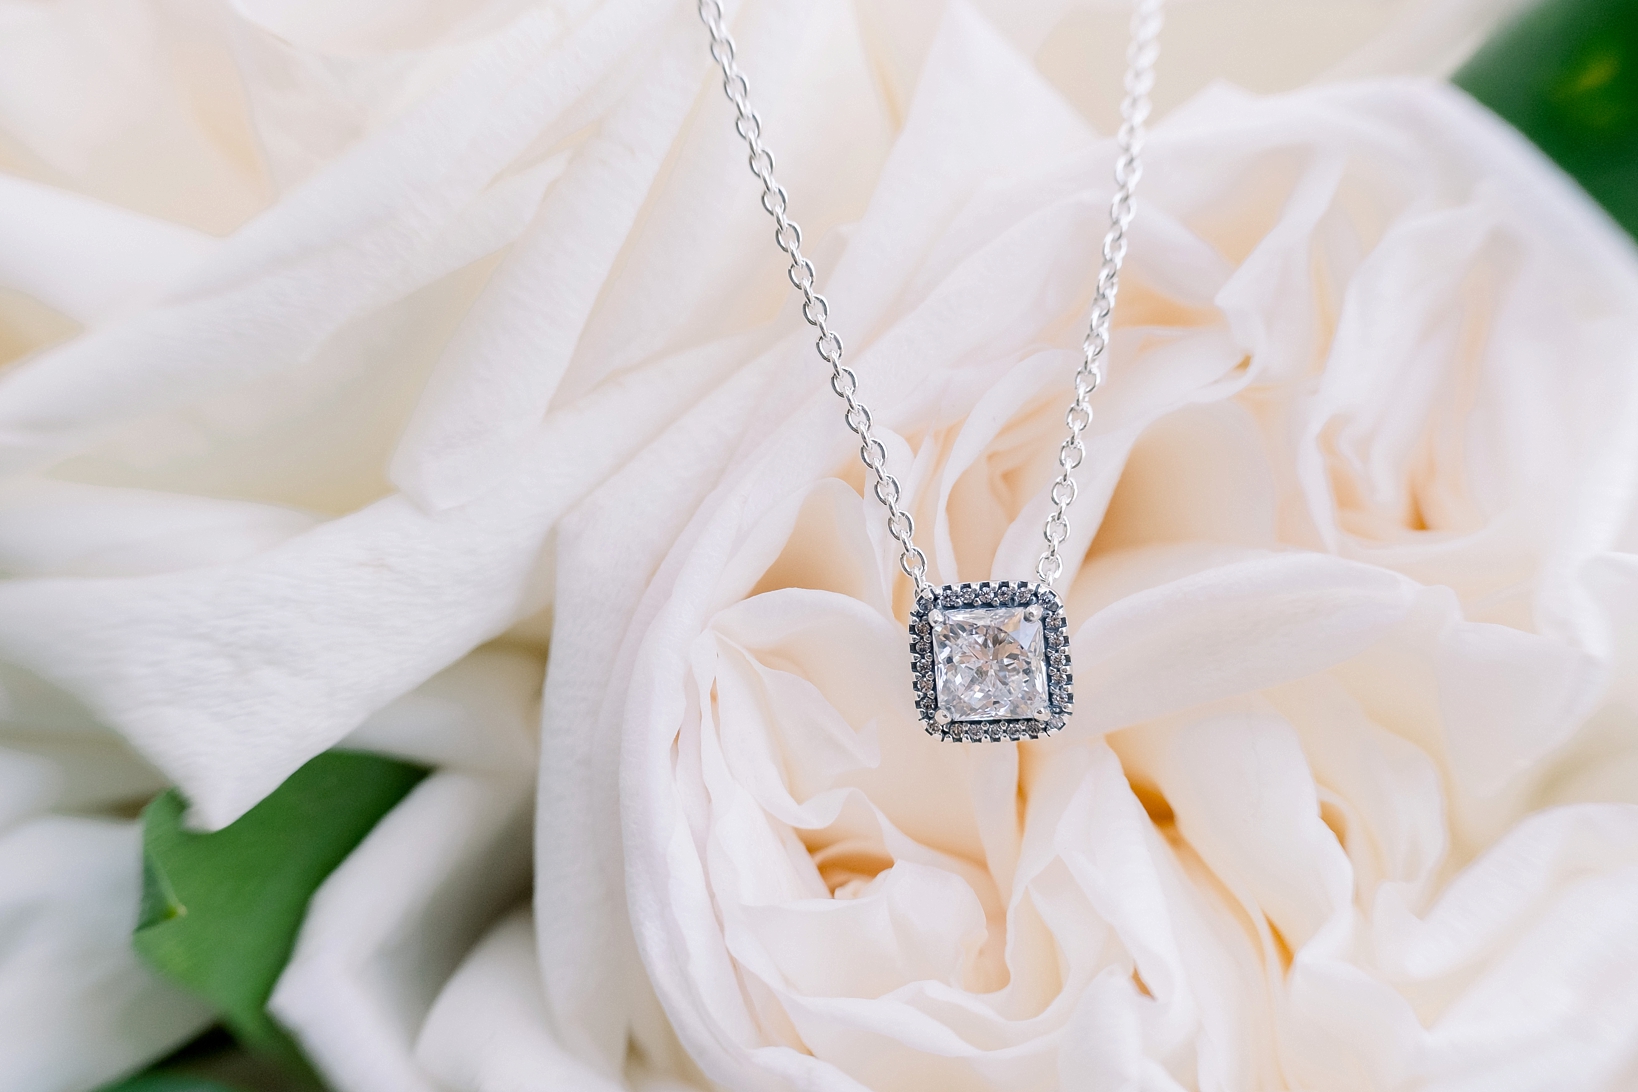 The diamond centered bridal necklace against the florals of her flower bouquet by sarahben.com